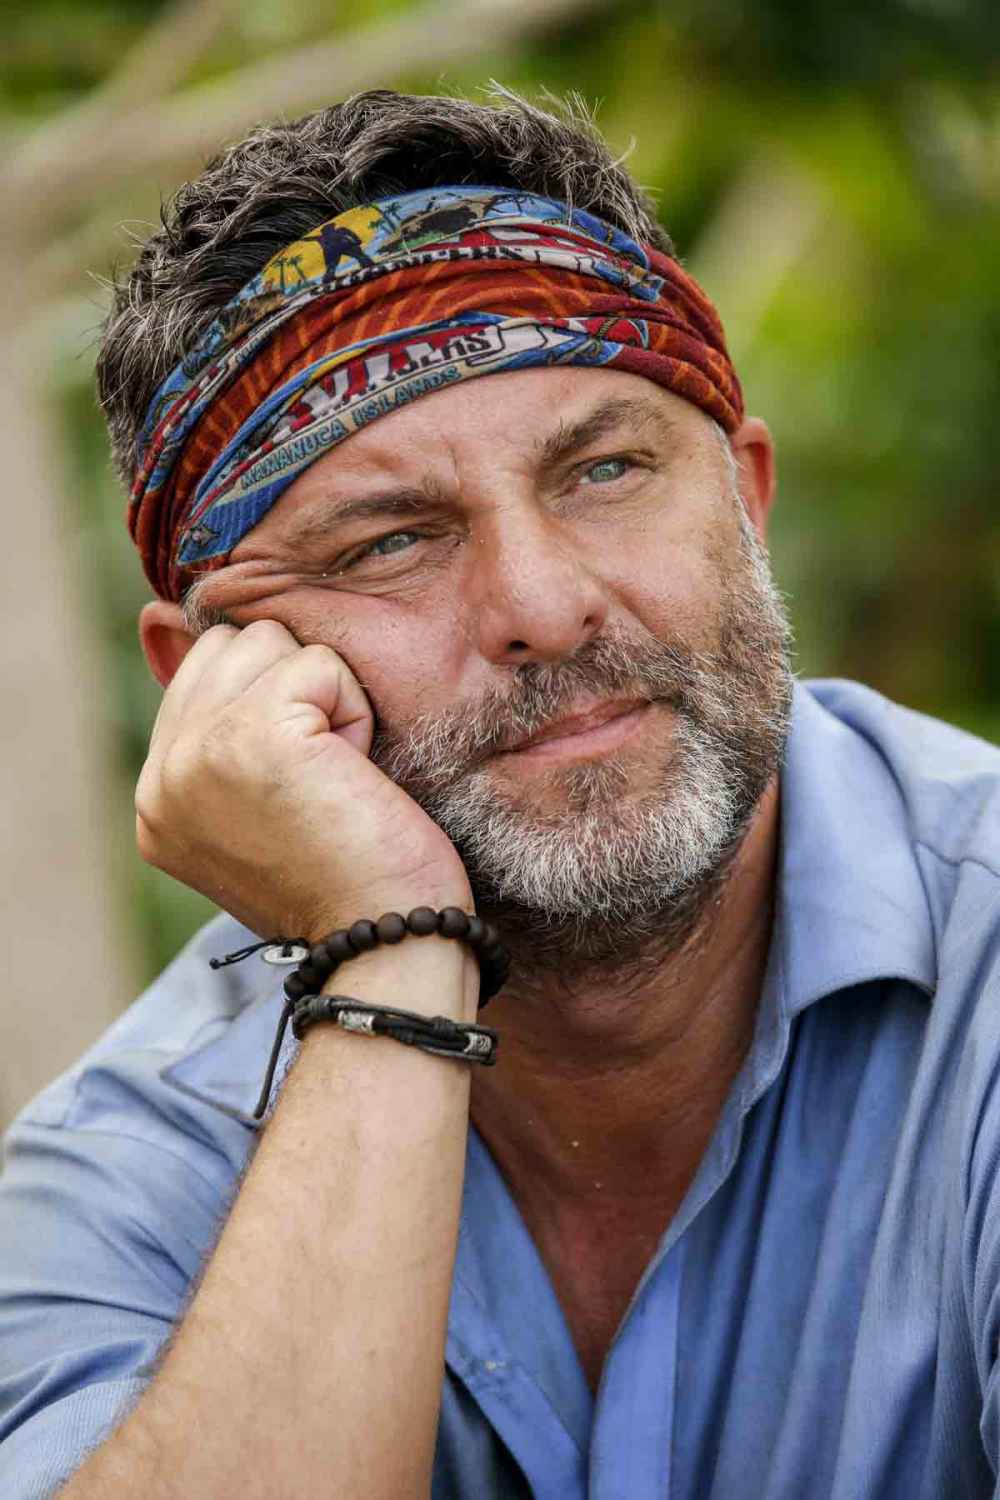 Jeff Varner apologized for his behavior but was booted off the show